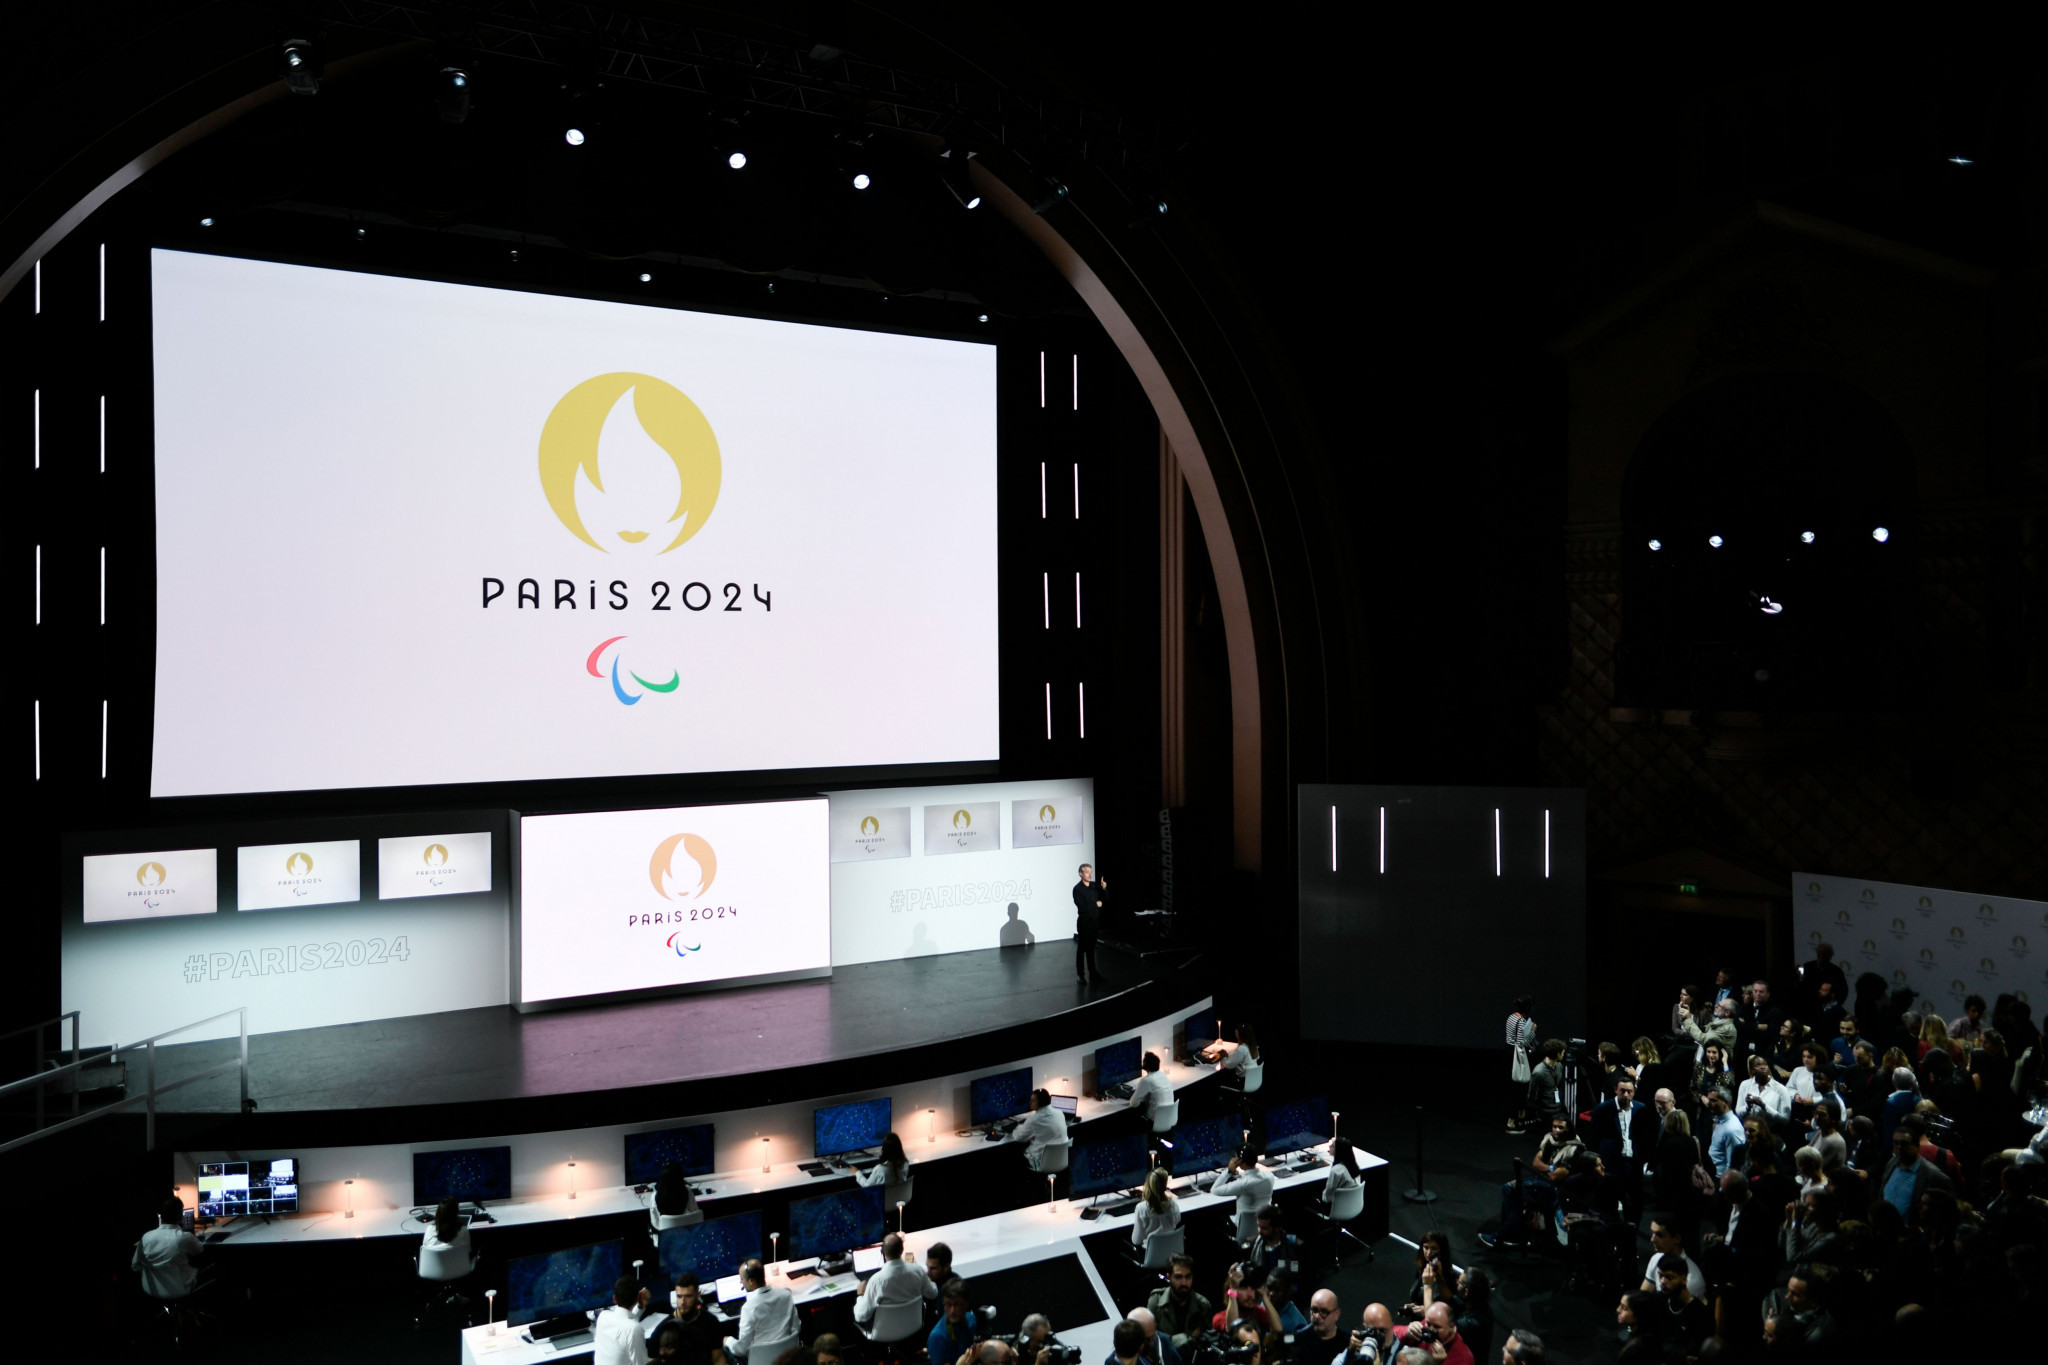 Enedis to power Paris 2024 sites after becoming latest partner